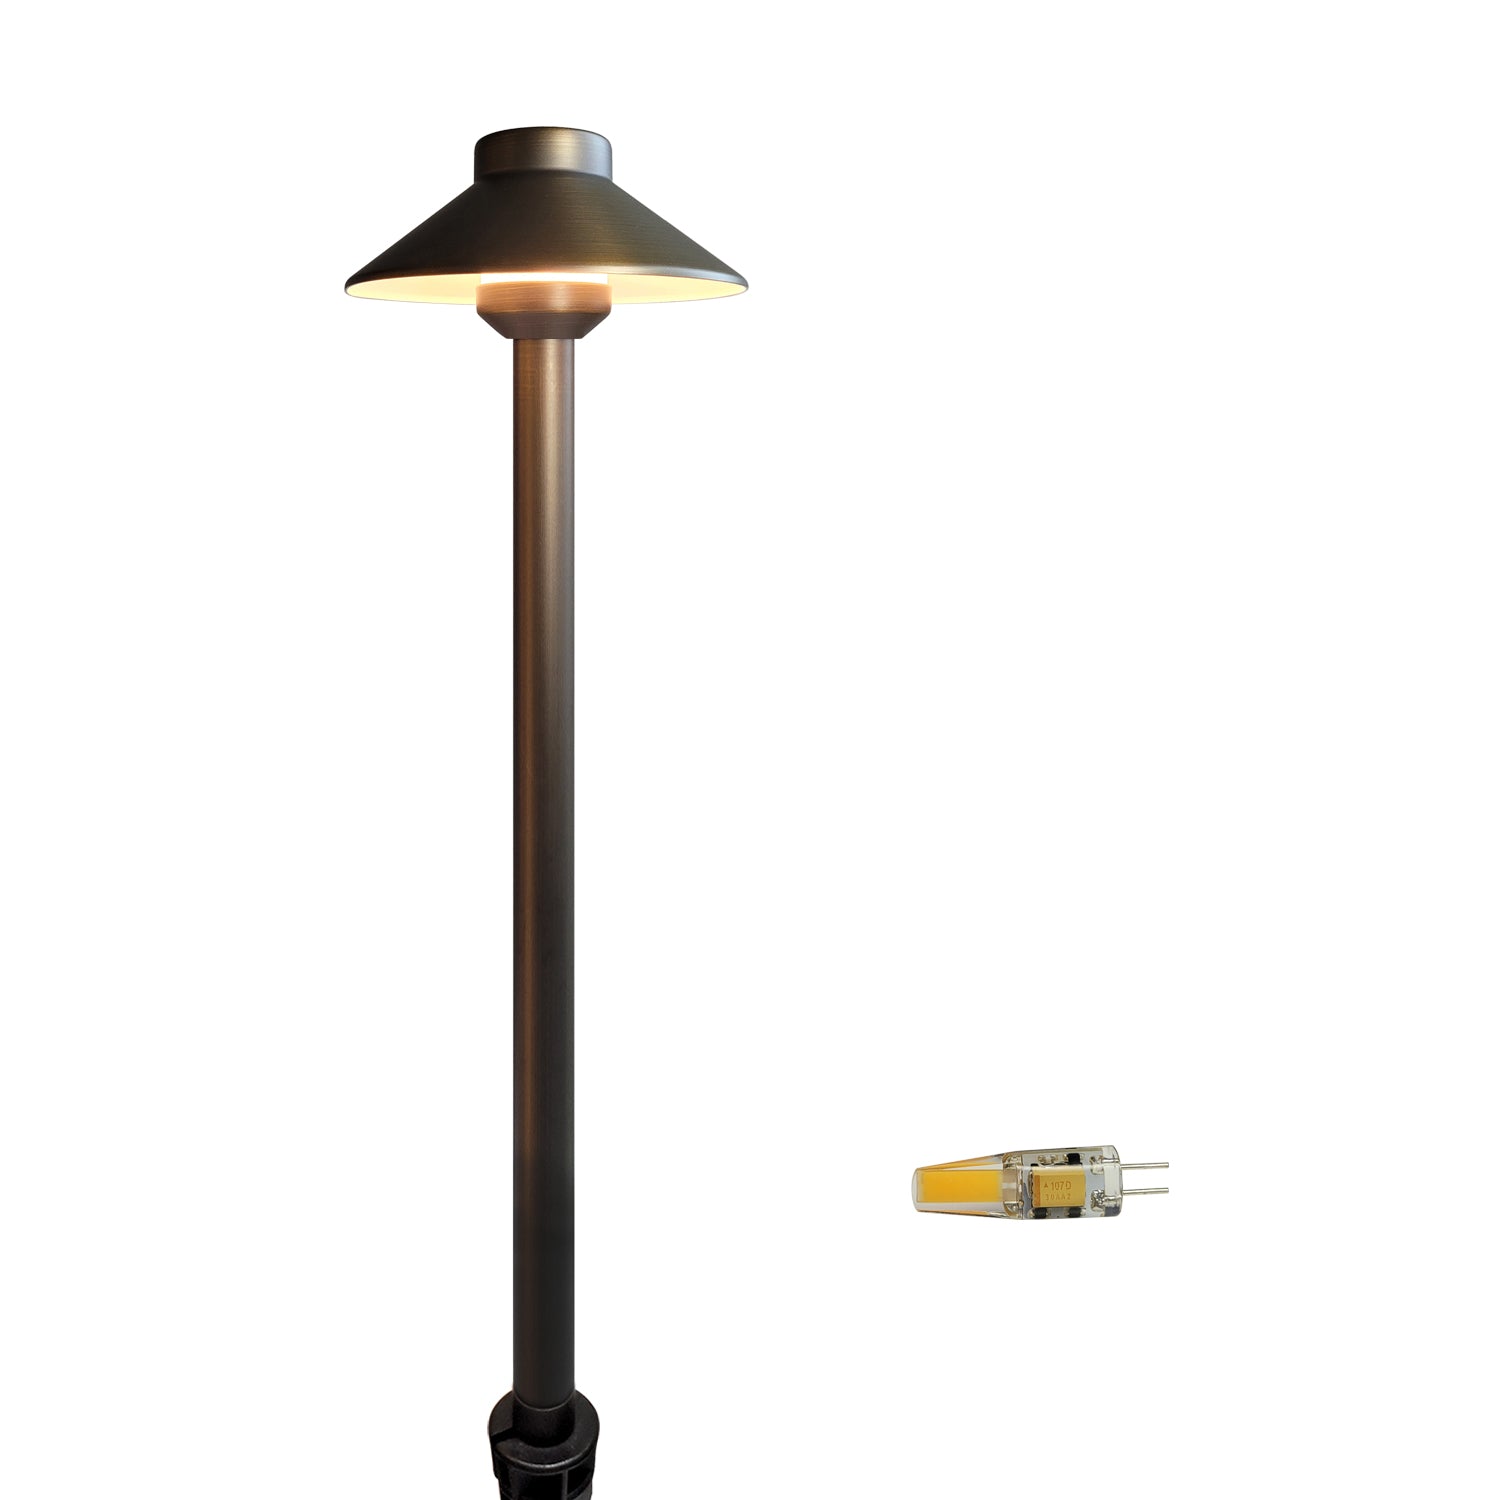 12V Low Voltage Brass Garden Path Light with conical top and LED bulb for garden and pathway illumination, durable and energy-efficient outdoor lighting solution.